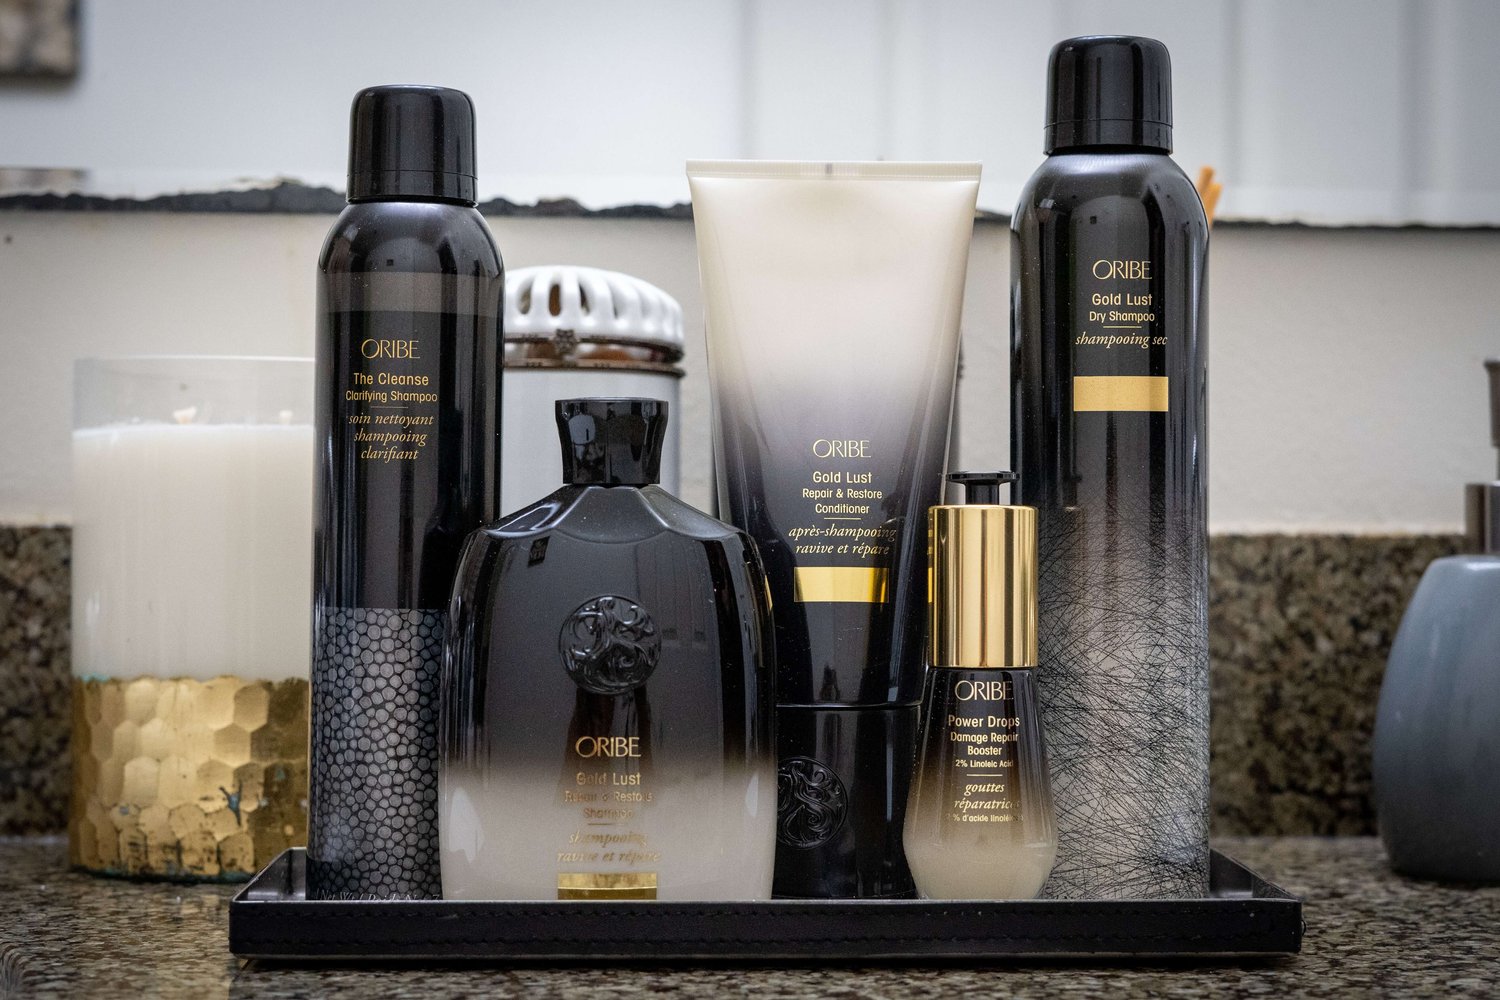 Oribe Luxury Haircare Range For Curly and Wavy Hair 2022.